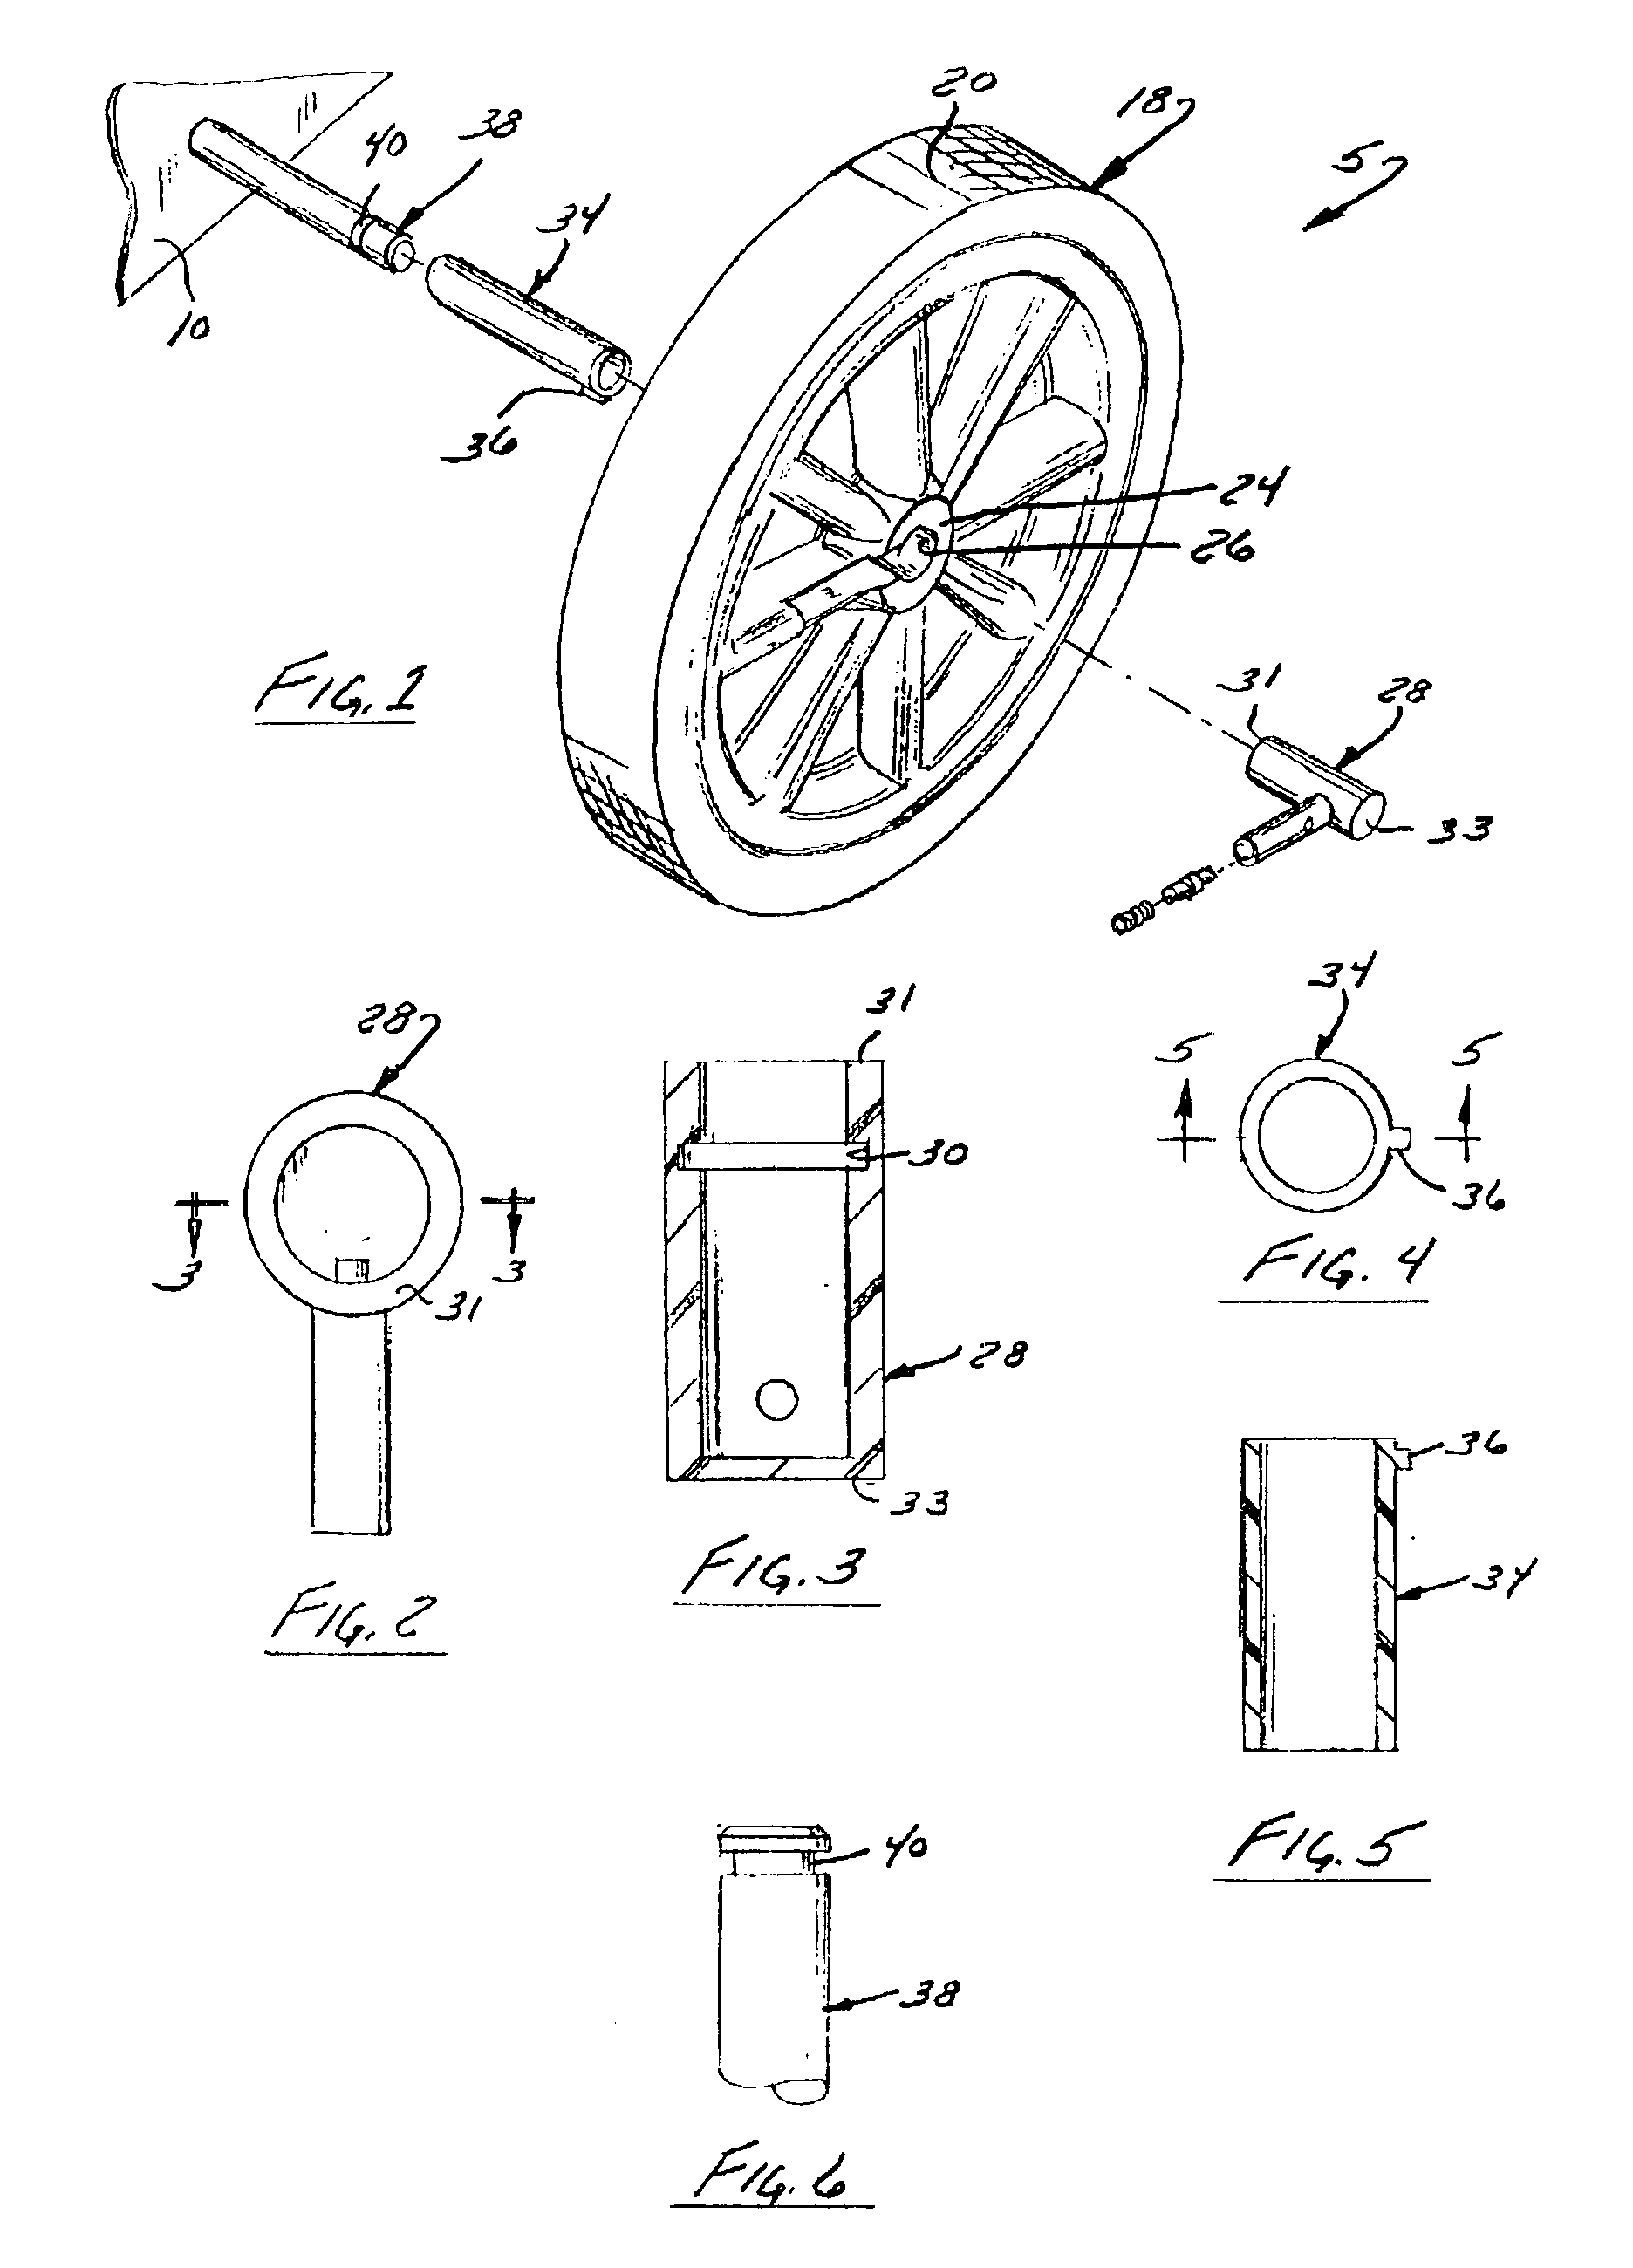 Wheel with interlocking hub and spacer